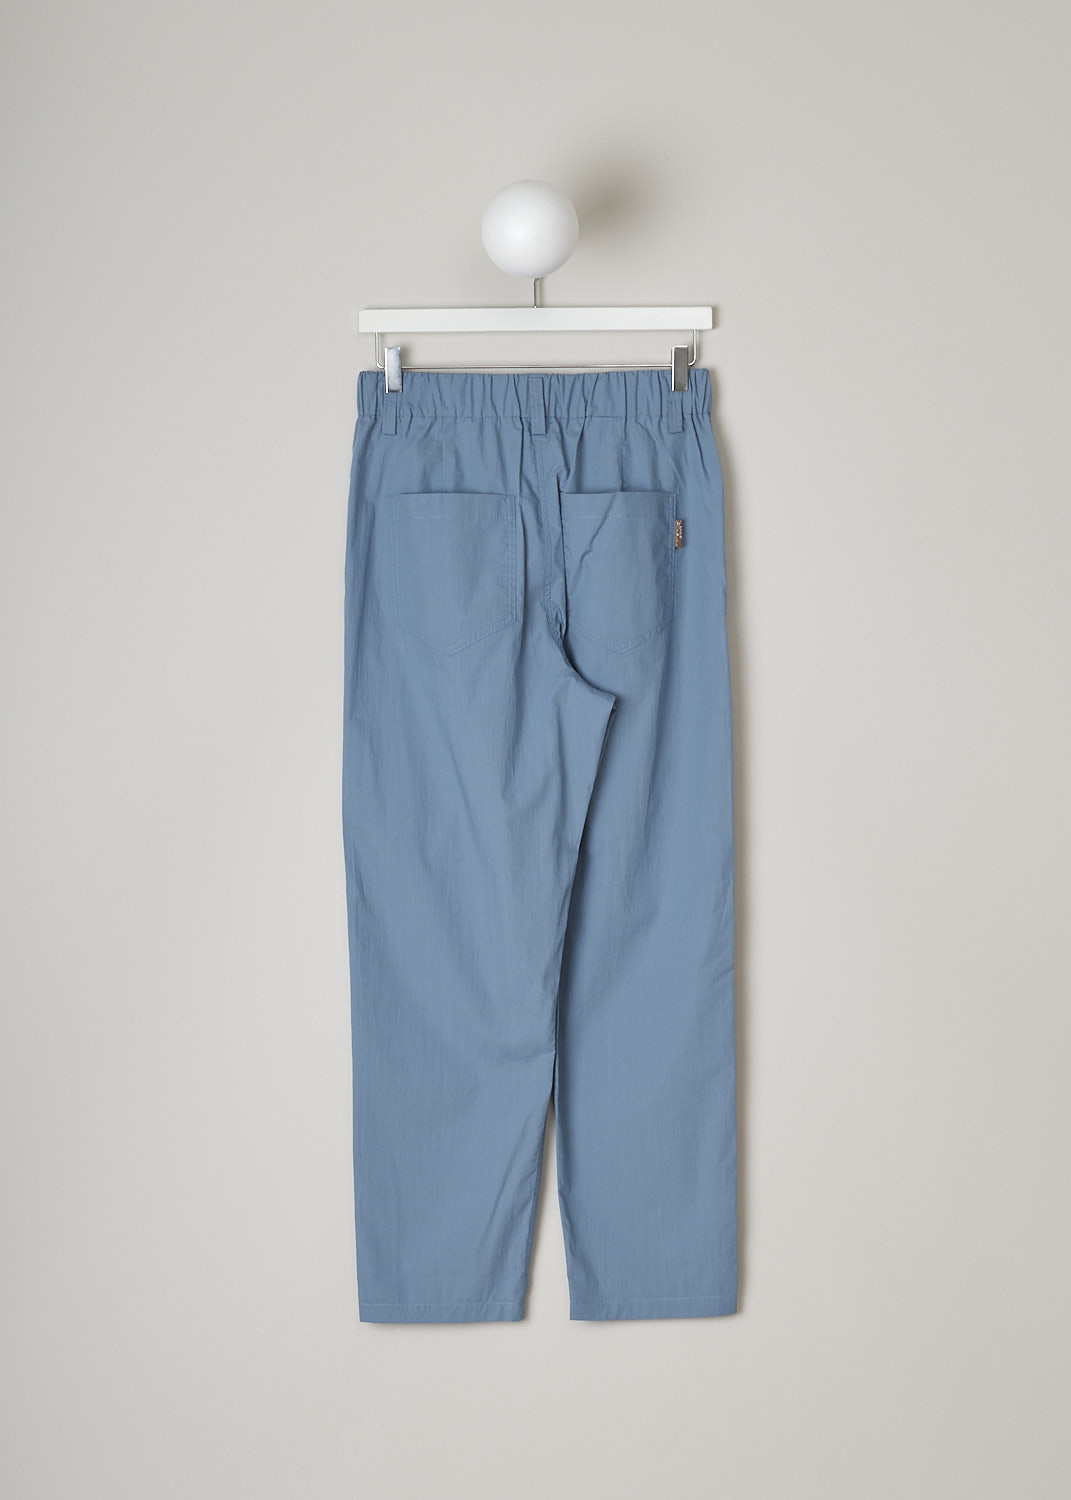 BRUNELLO CUCINELLI, LIGHT BLUE SLIP-ON PANTS, M0H93P7894_C8627, Blue, Back, These light blue slip-on pants have an elasticated waistband with belt loops and a mock-fly stitched on the front. These pants have a traditional five pocket configuration, with two pockets and a single coin pocket in the front and two patch pockets in the back. The straight cropped pant legs have front pleats. 
